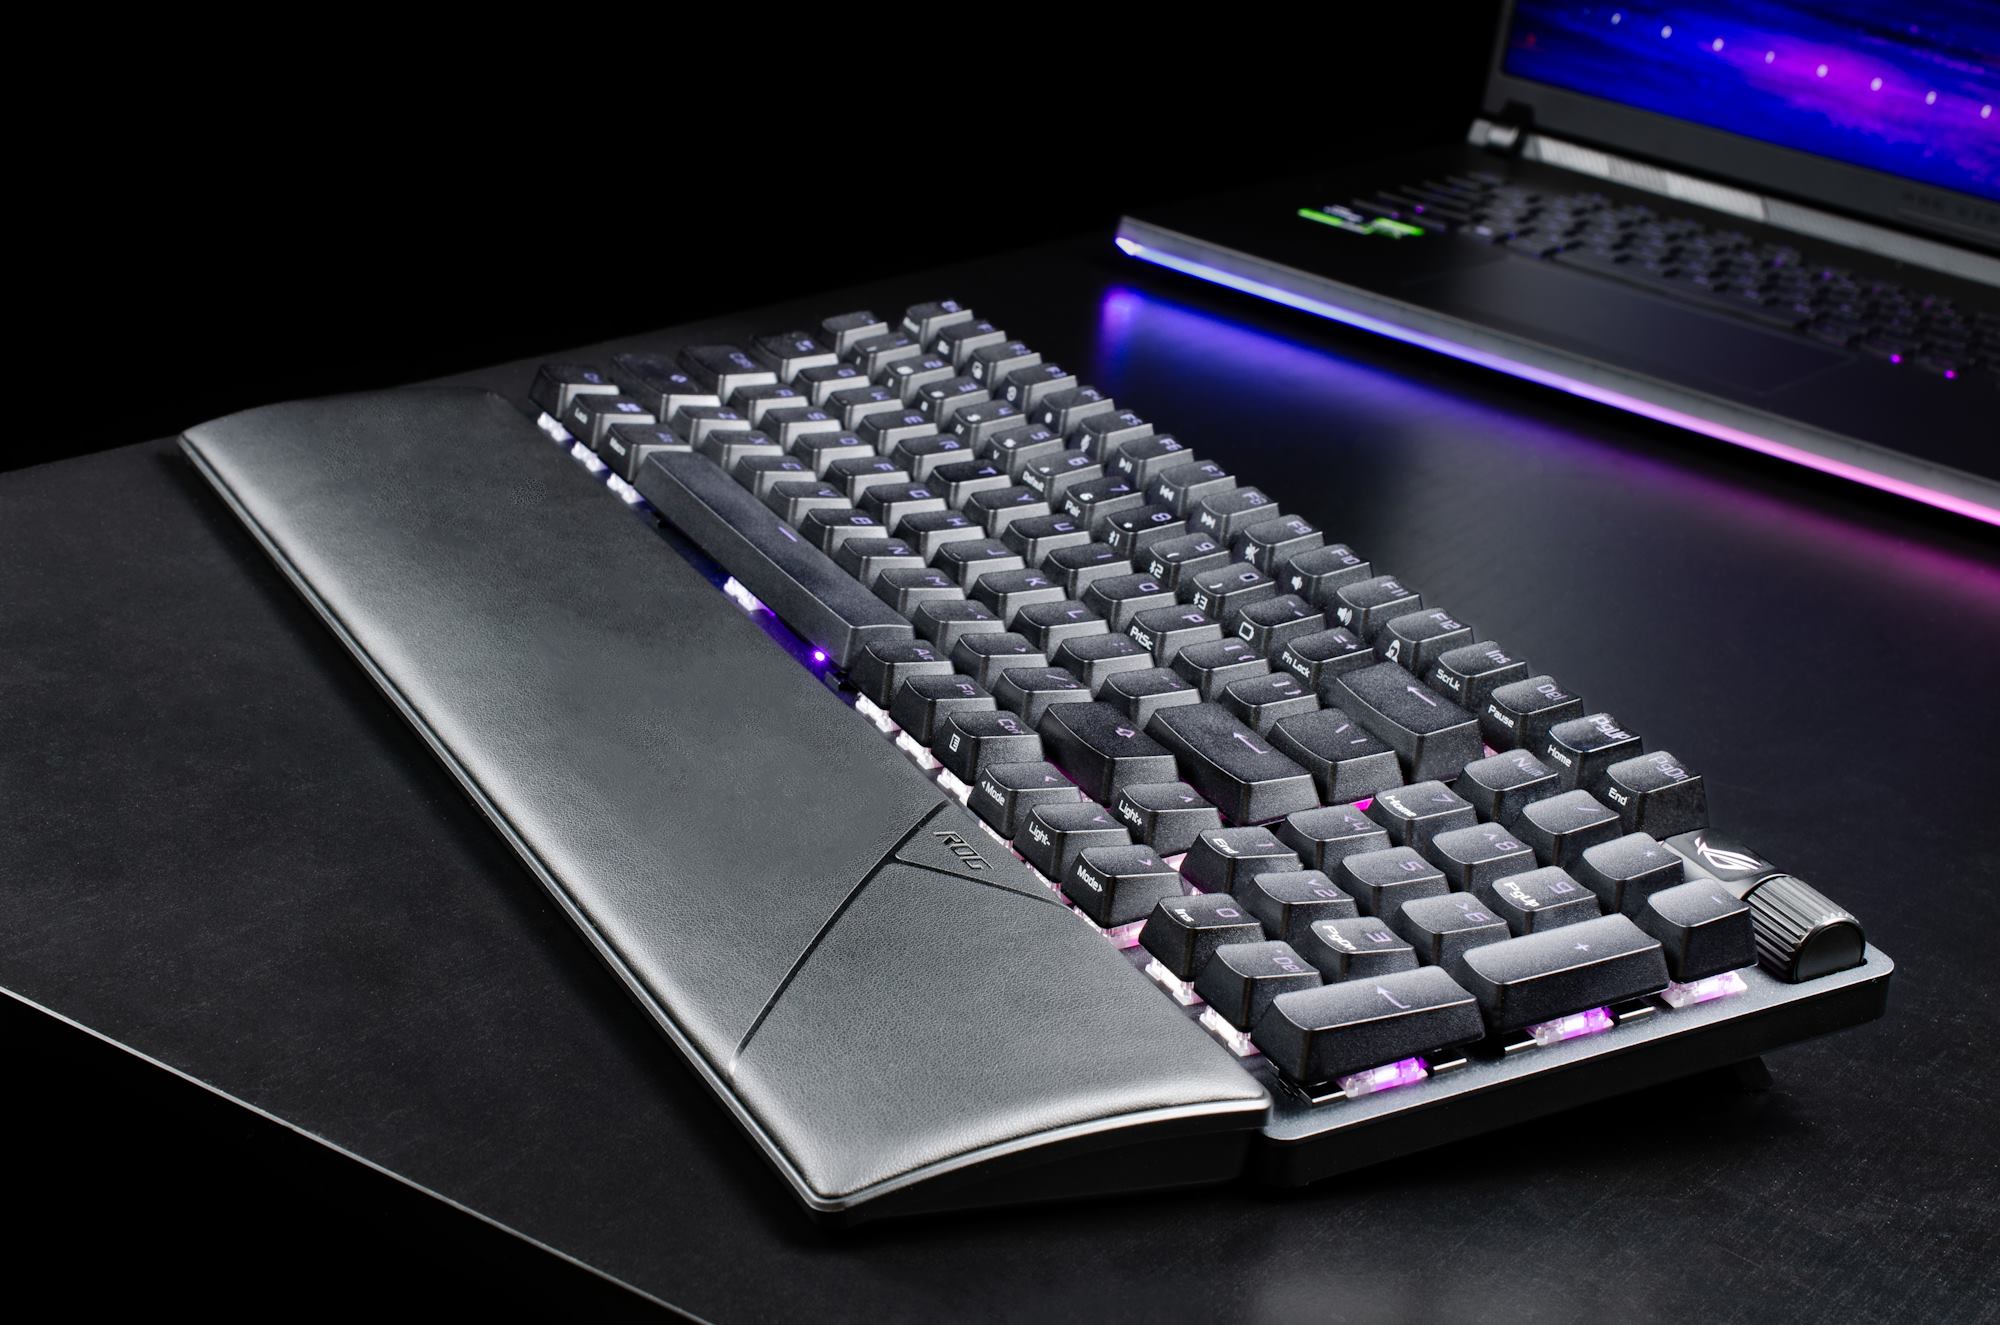 The ROG Strix Scope II 96 Wireless gaming keyboard with its palmrest attached on a table with an ROG laptop